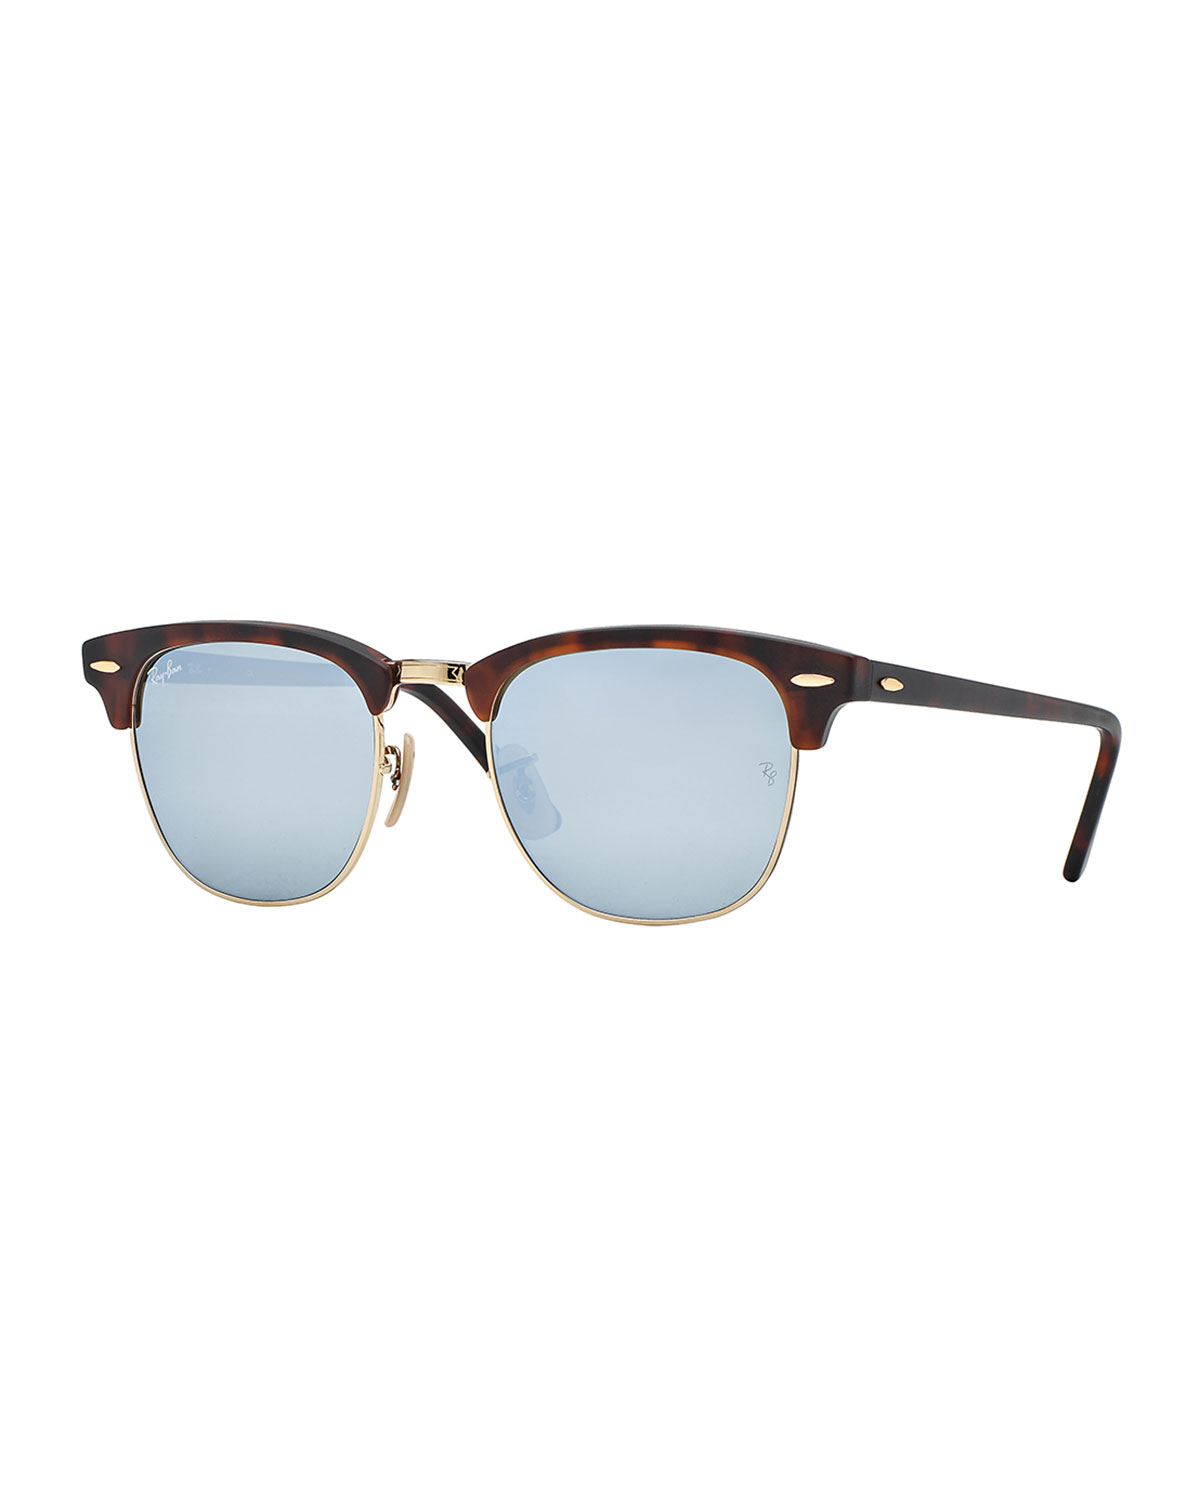 ray ban clubmaster silver mirror,Limited Time Offer,slabrealty.com